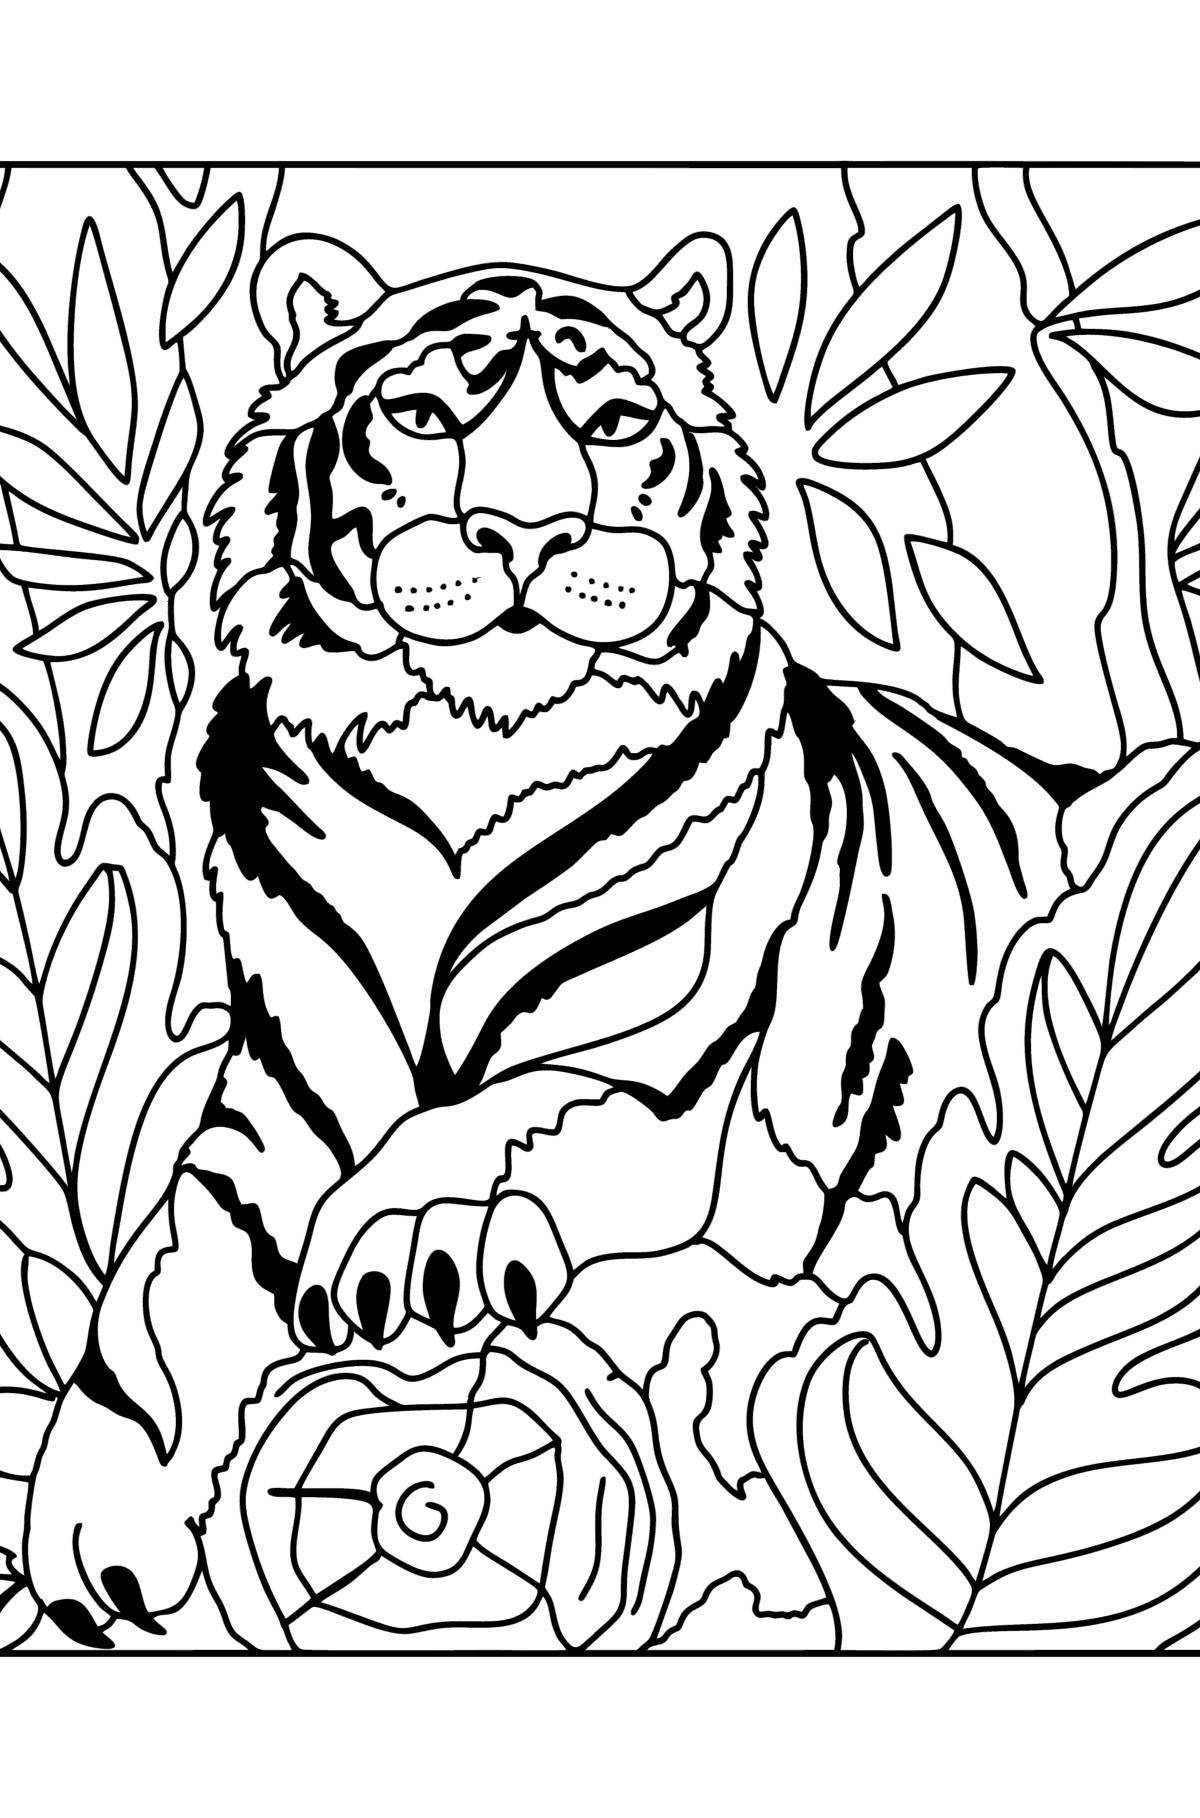 Dazzling tigress with cub coloring book